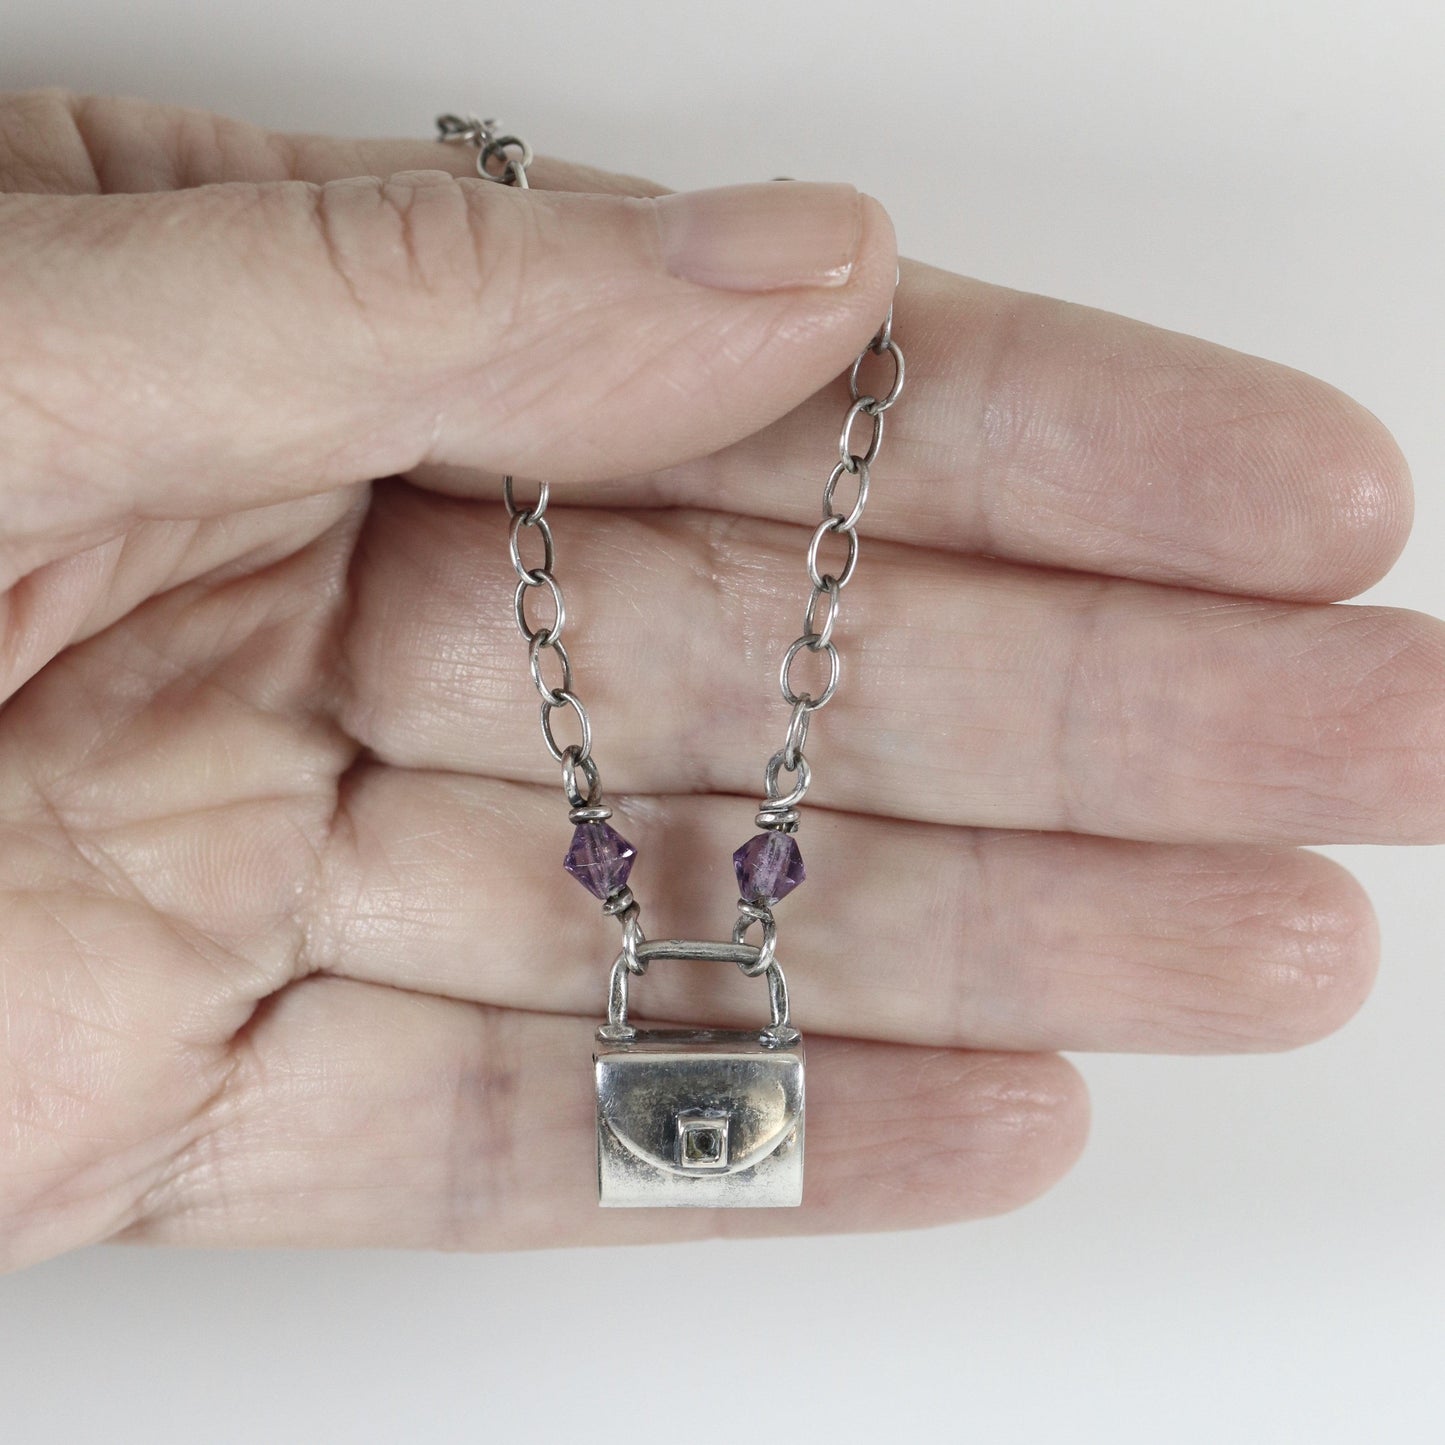 Vintage Silver Jewelry | Delicate Bead and Purse Necklace - Carmel Fine Silver Jewelry